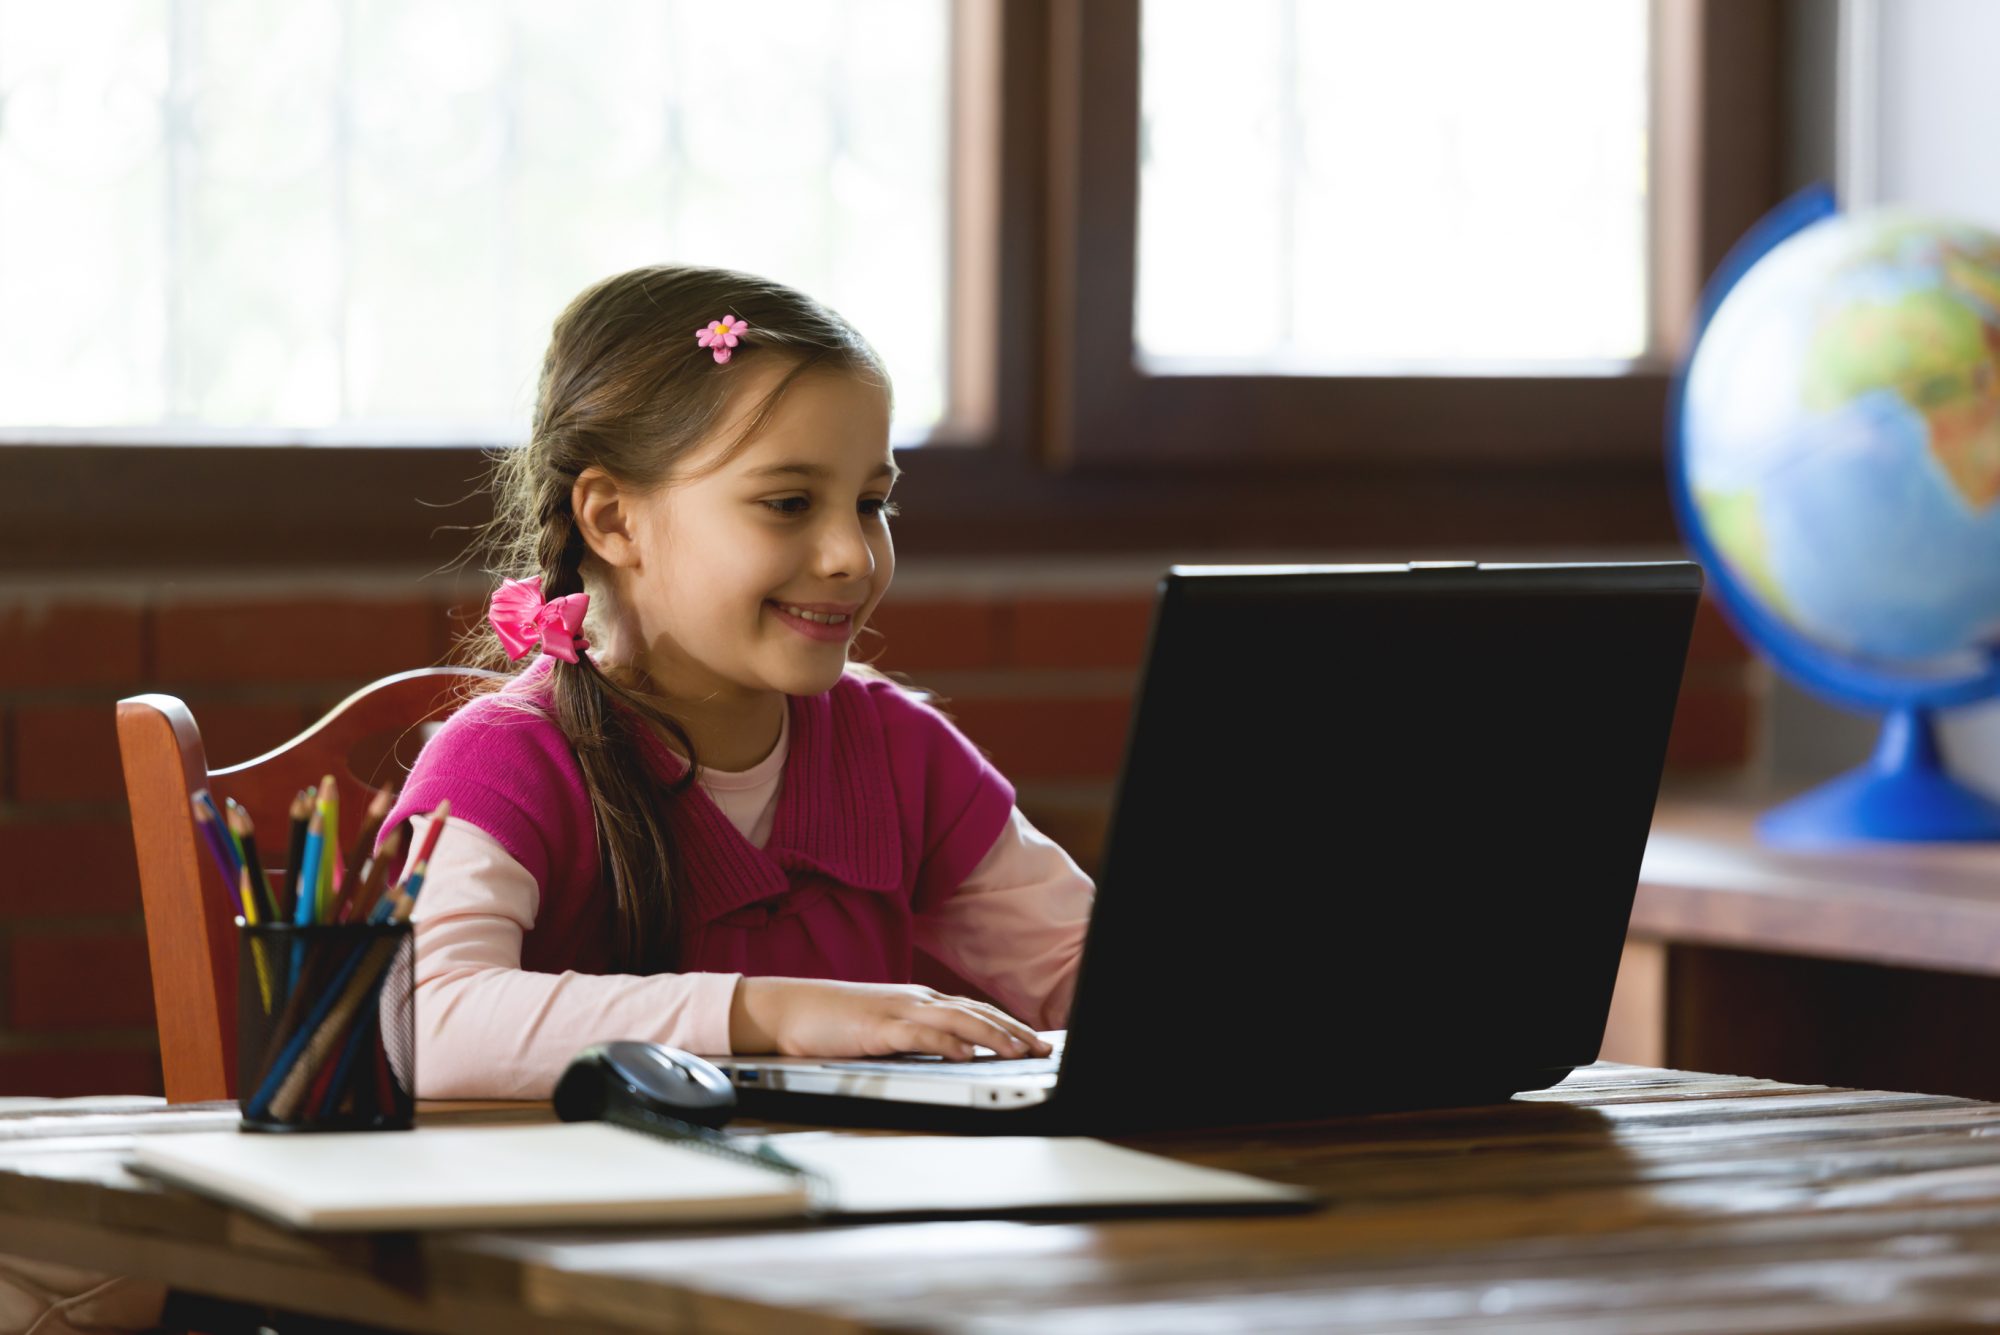 5 reasons why online learning is a crucial part of education